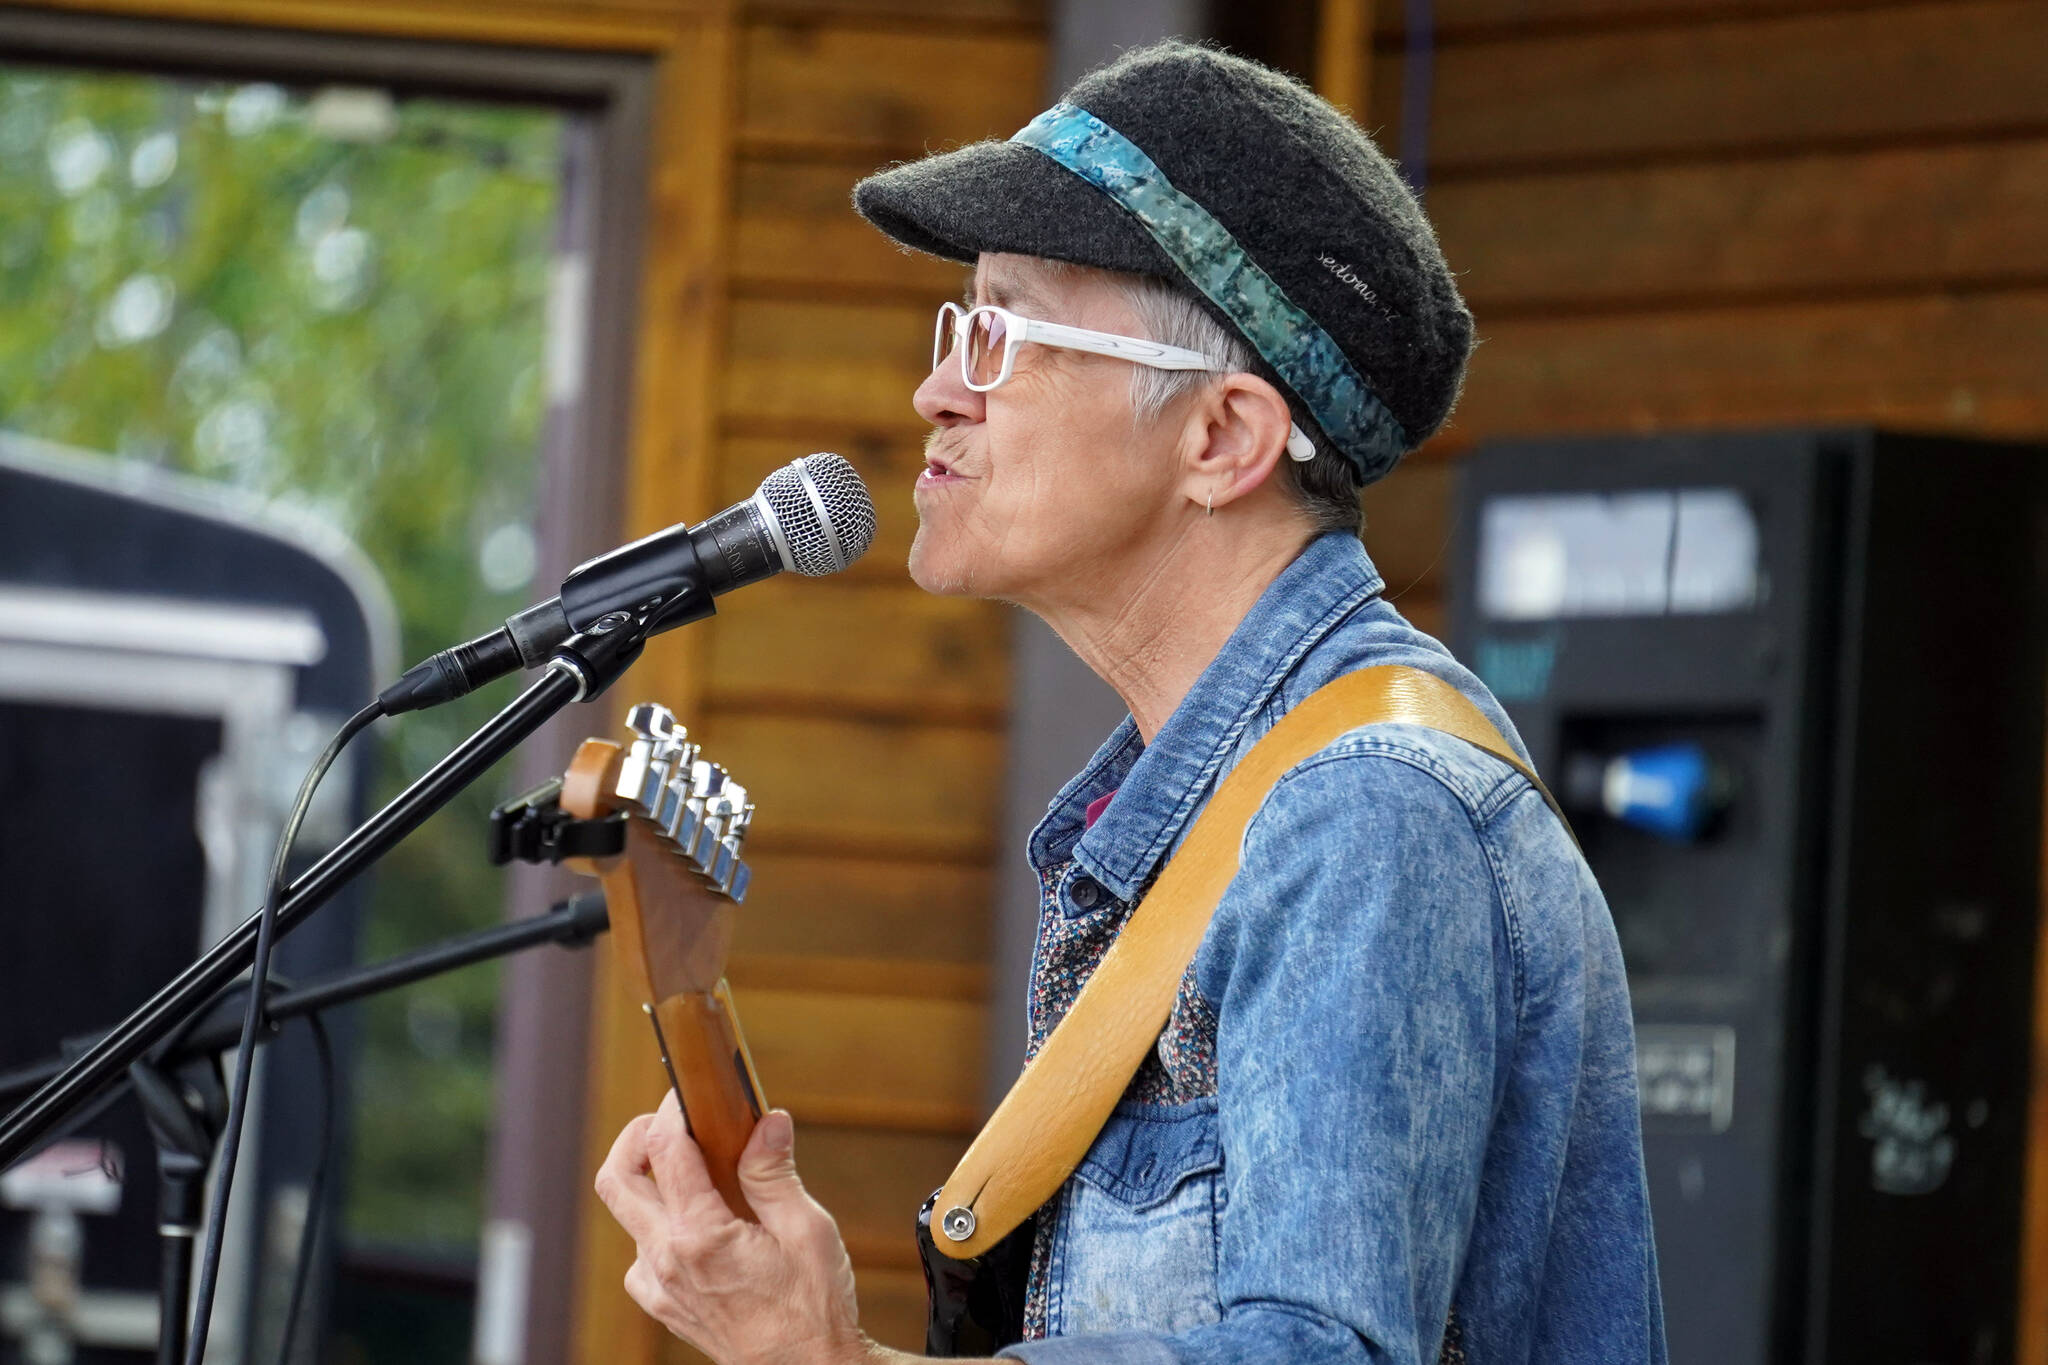 Mitzi Cowell, part of Connie Brannock’s Tiny House of Funk, performs during the Soldotna Music Series at Soldotna Creek Park in Soldotna, Alaska, on Wednesday, June 21, 2023. (Jake Dye/Peninsula Clarion)